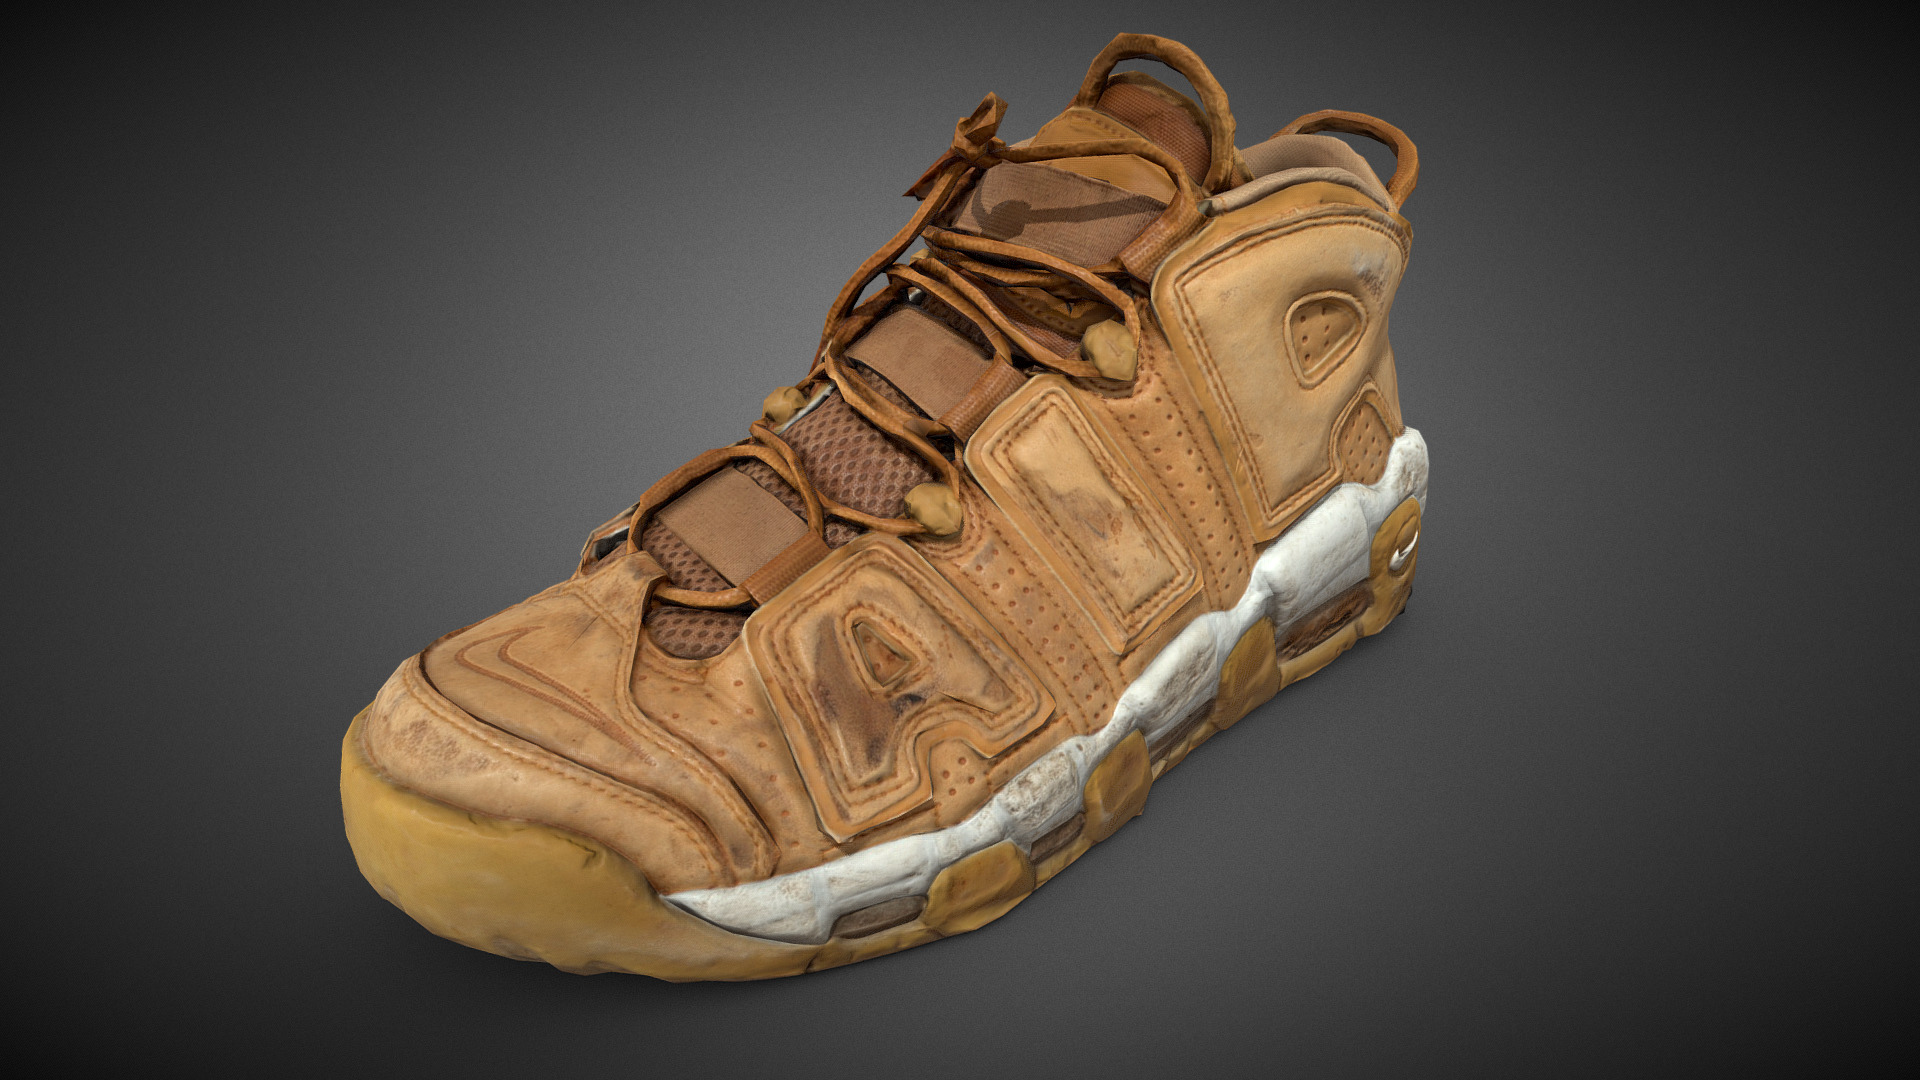 3D model Nike Air More Uptempo 96 PRM - This is a 3D model of the Nike Air More Uptempo 96 PRM. The 3D model is about a gold helmet with a design.